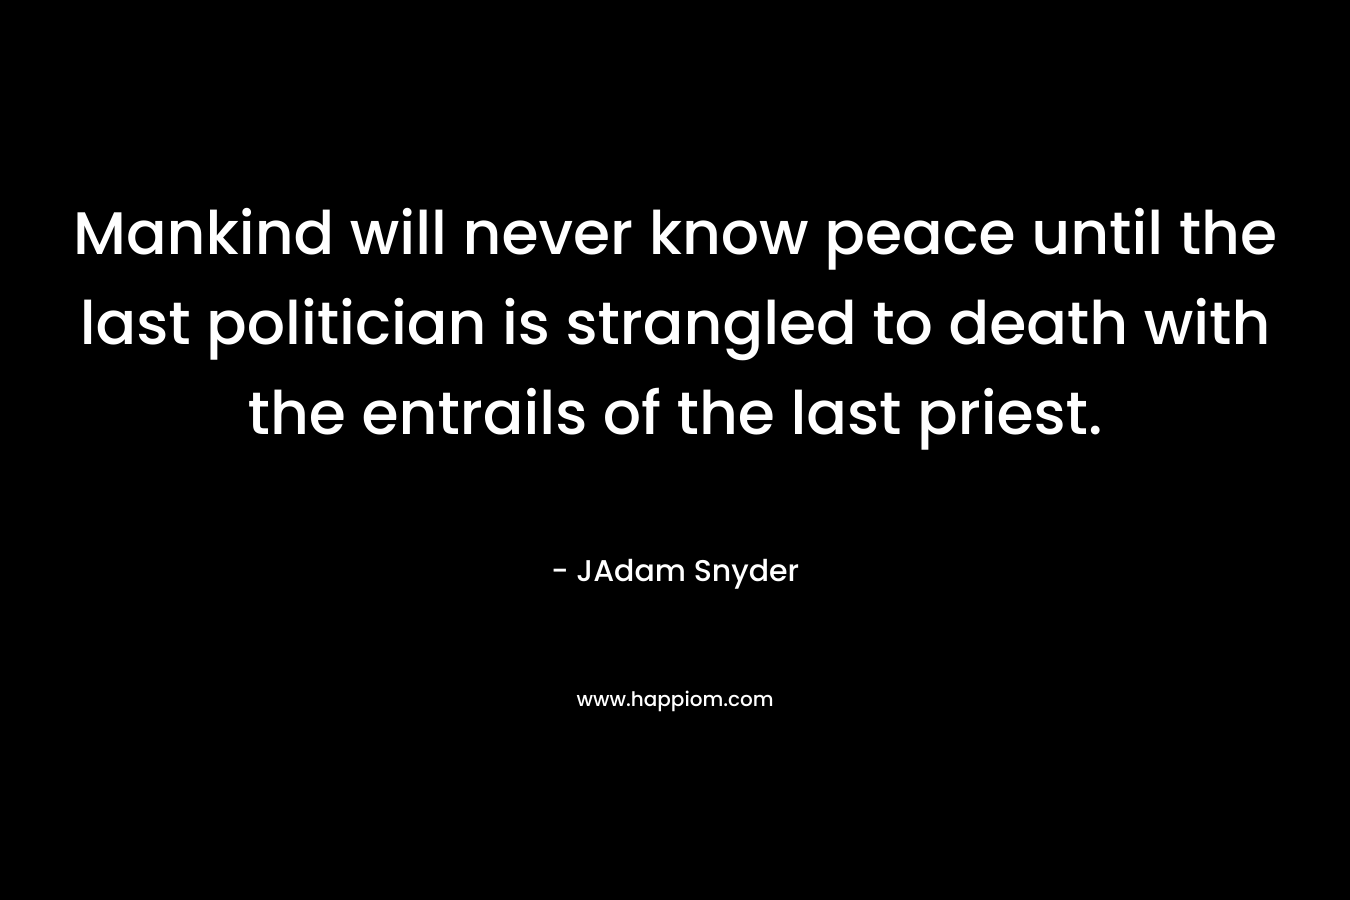 Mankind will never know peace until the last politician is strangled to death with the entrails of the last priest.